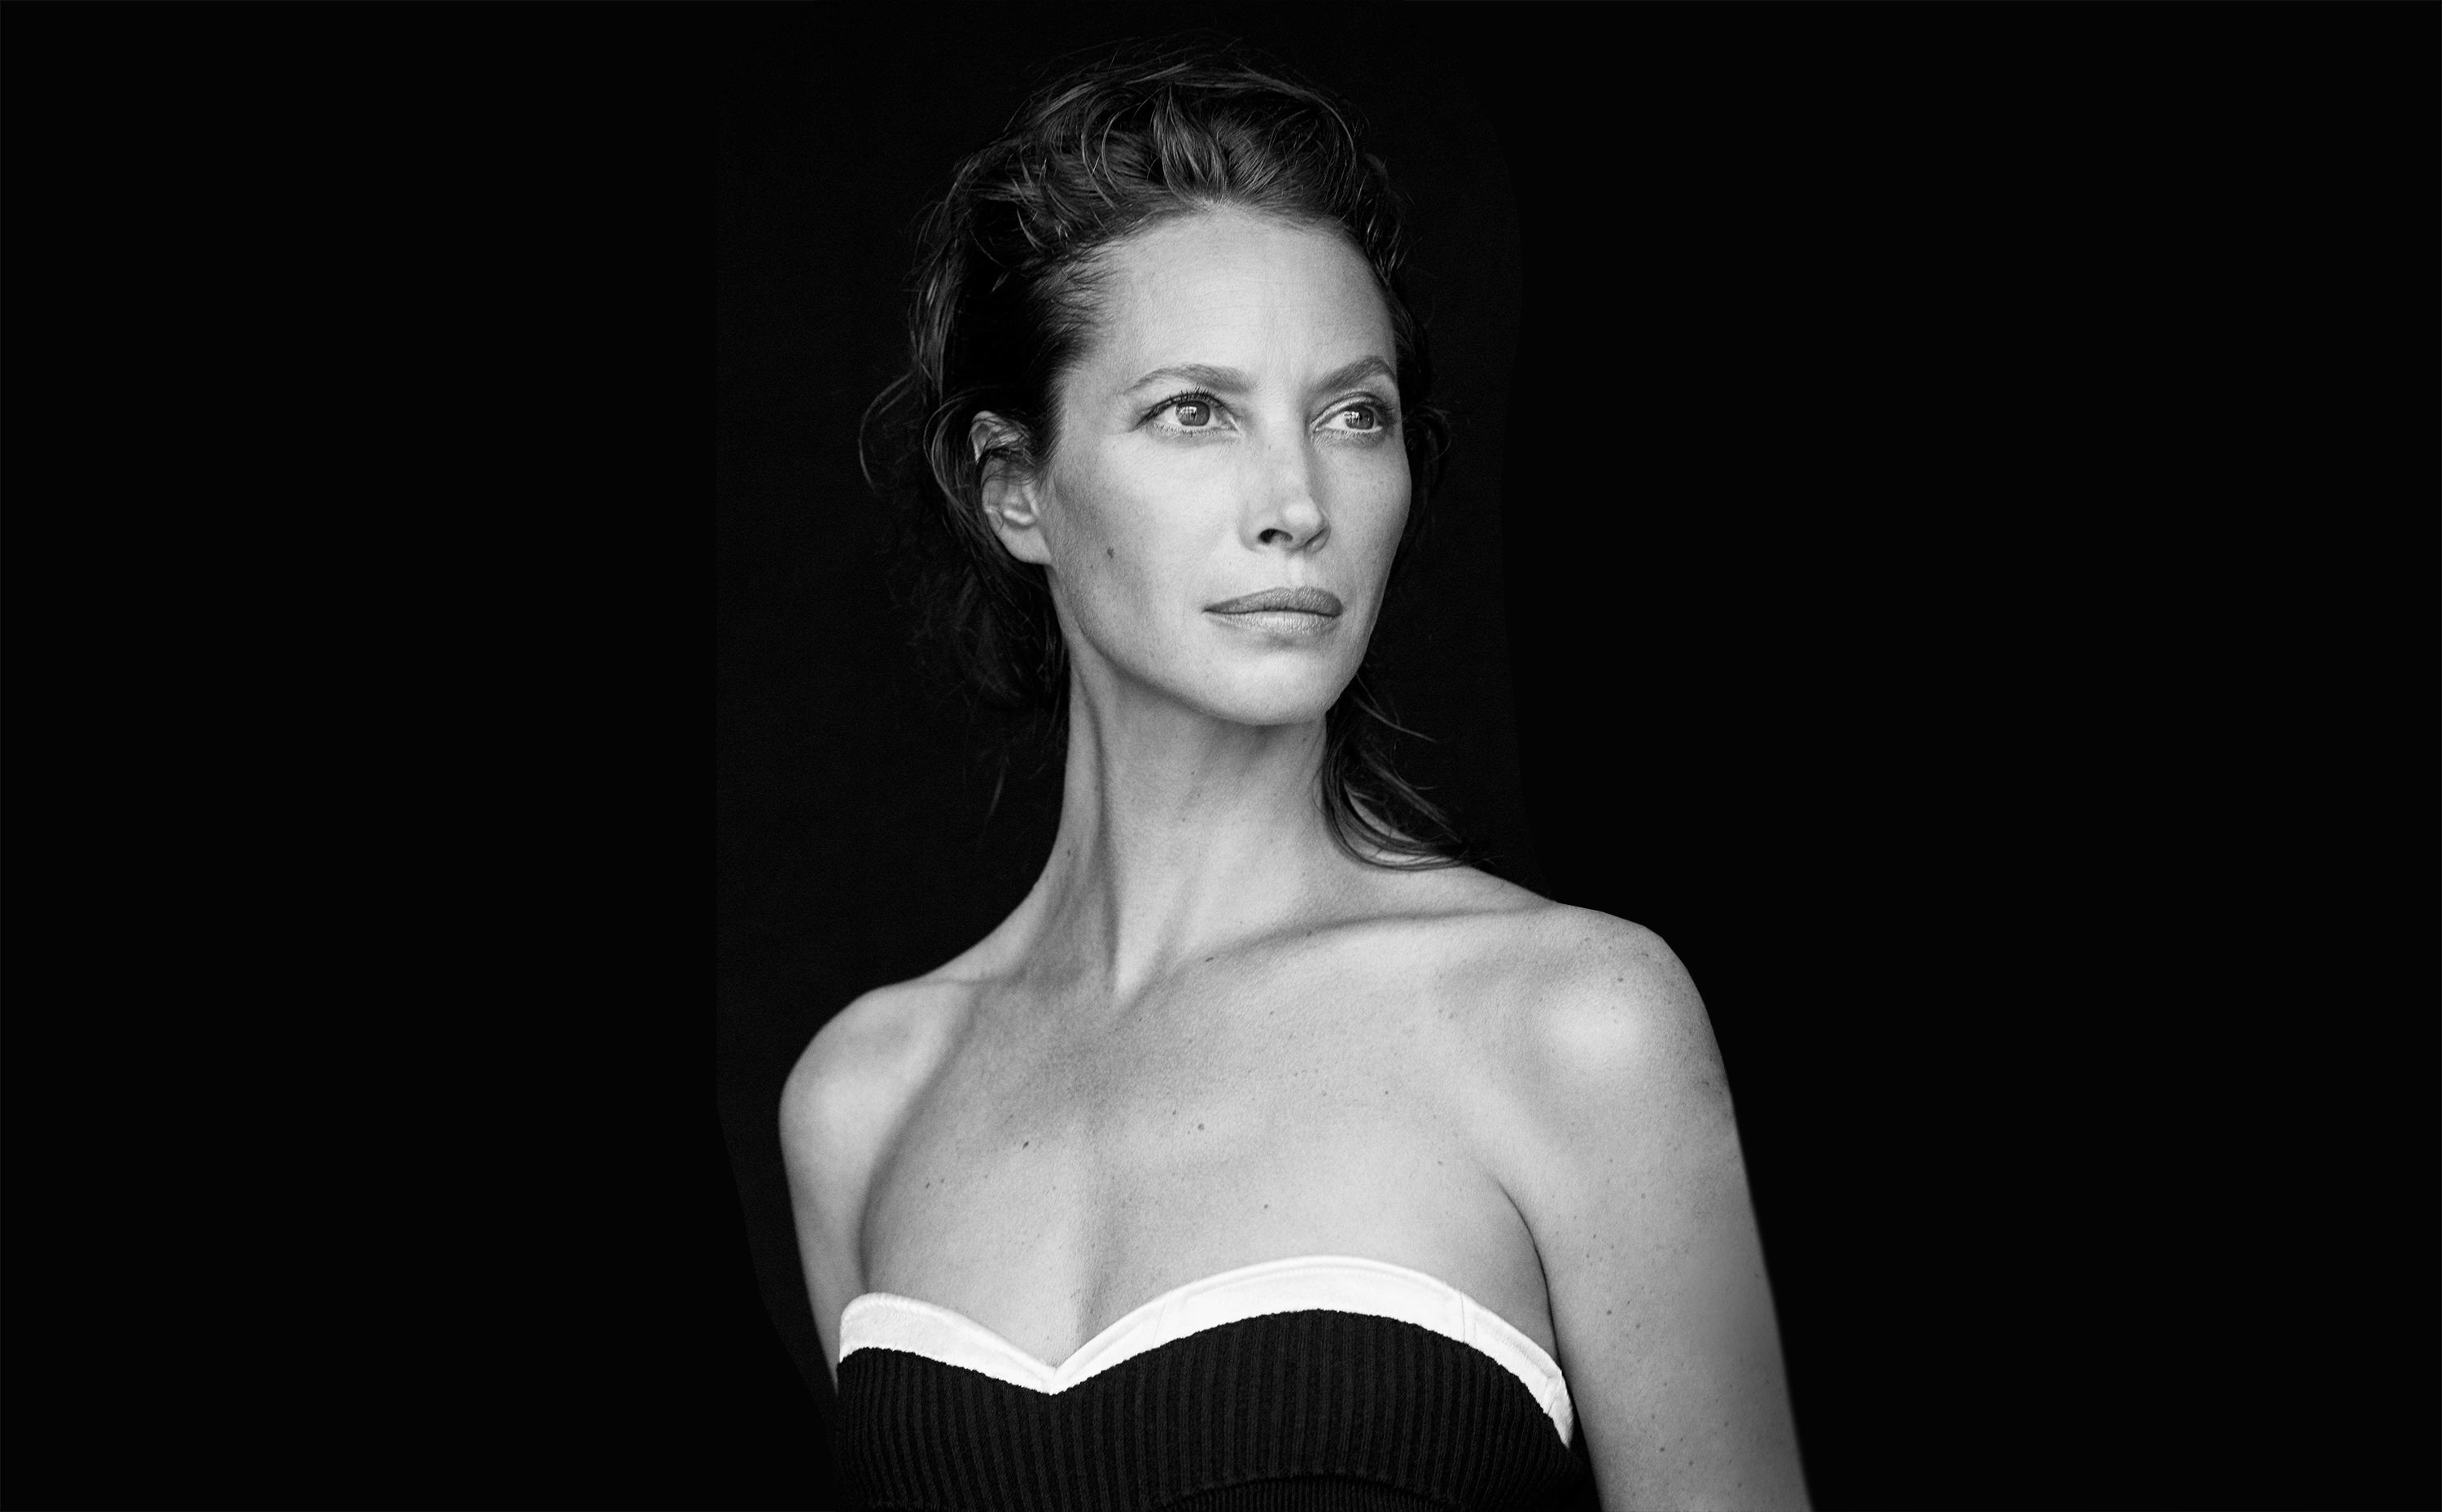 What do you think of Christy Turlington's looks? | Lipstick Alley